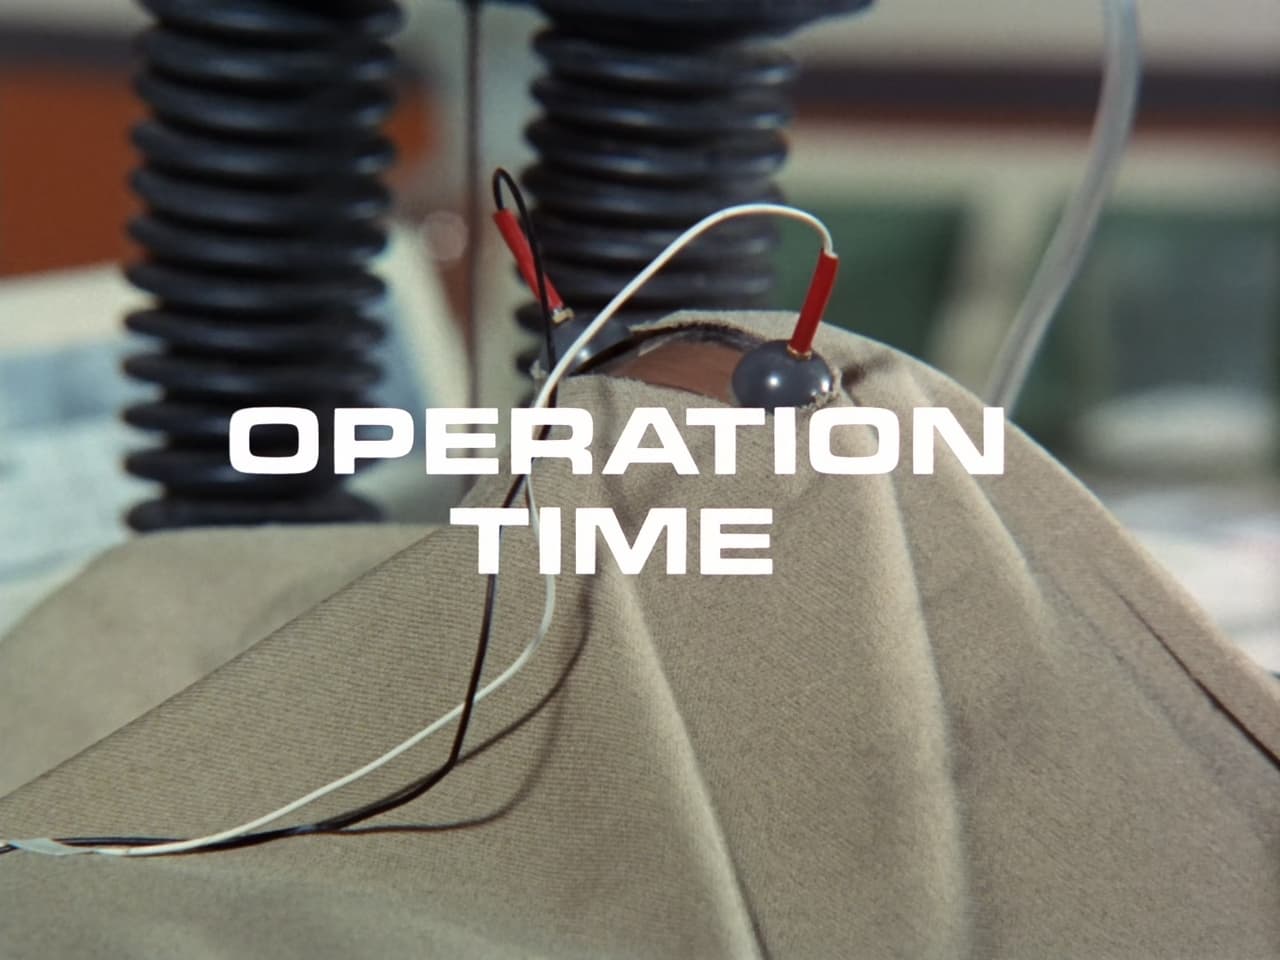 Operation Time